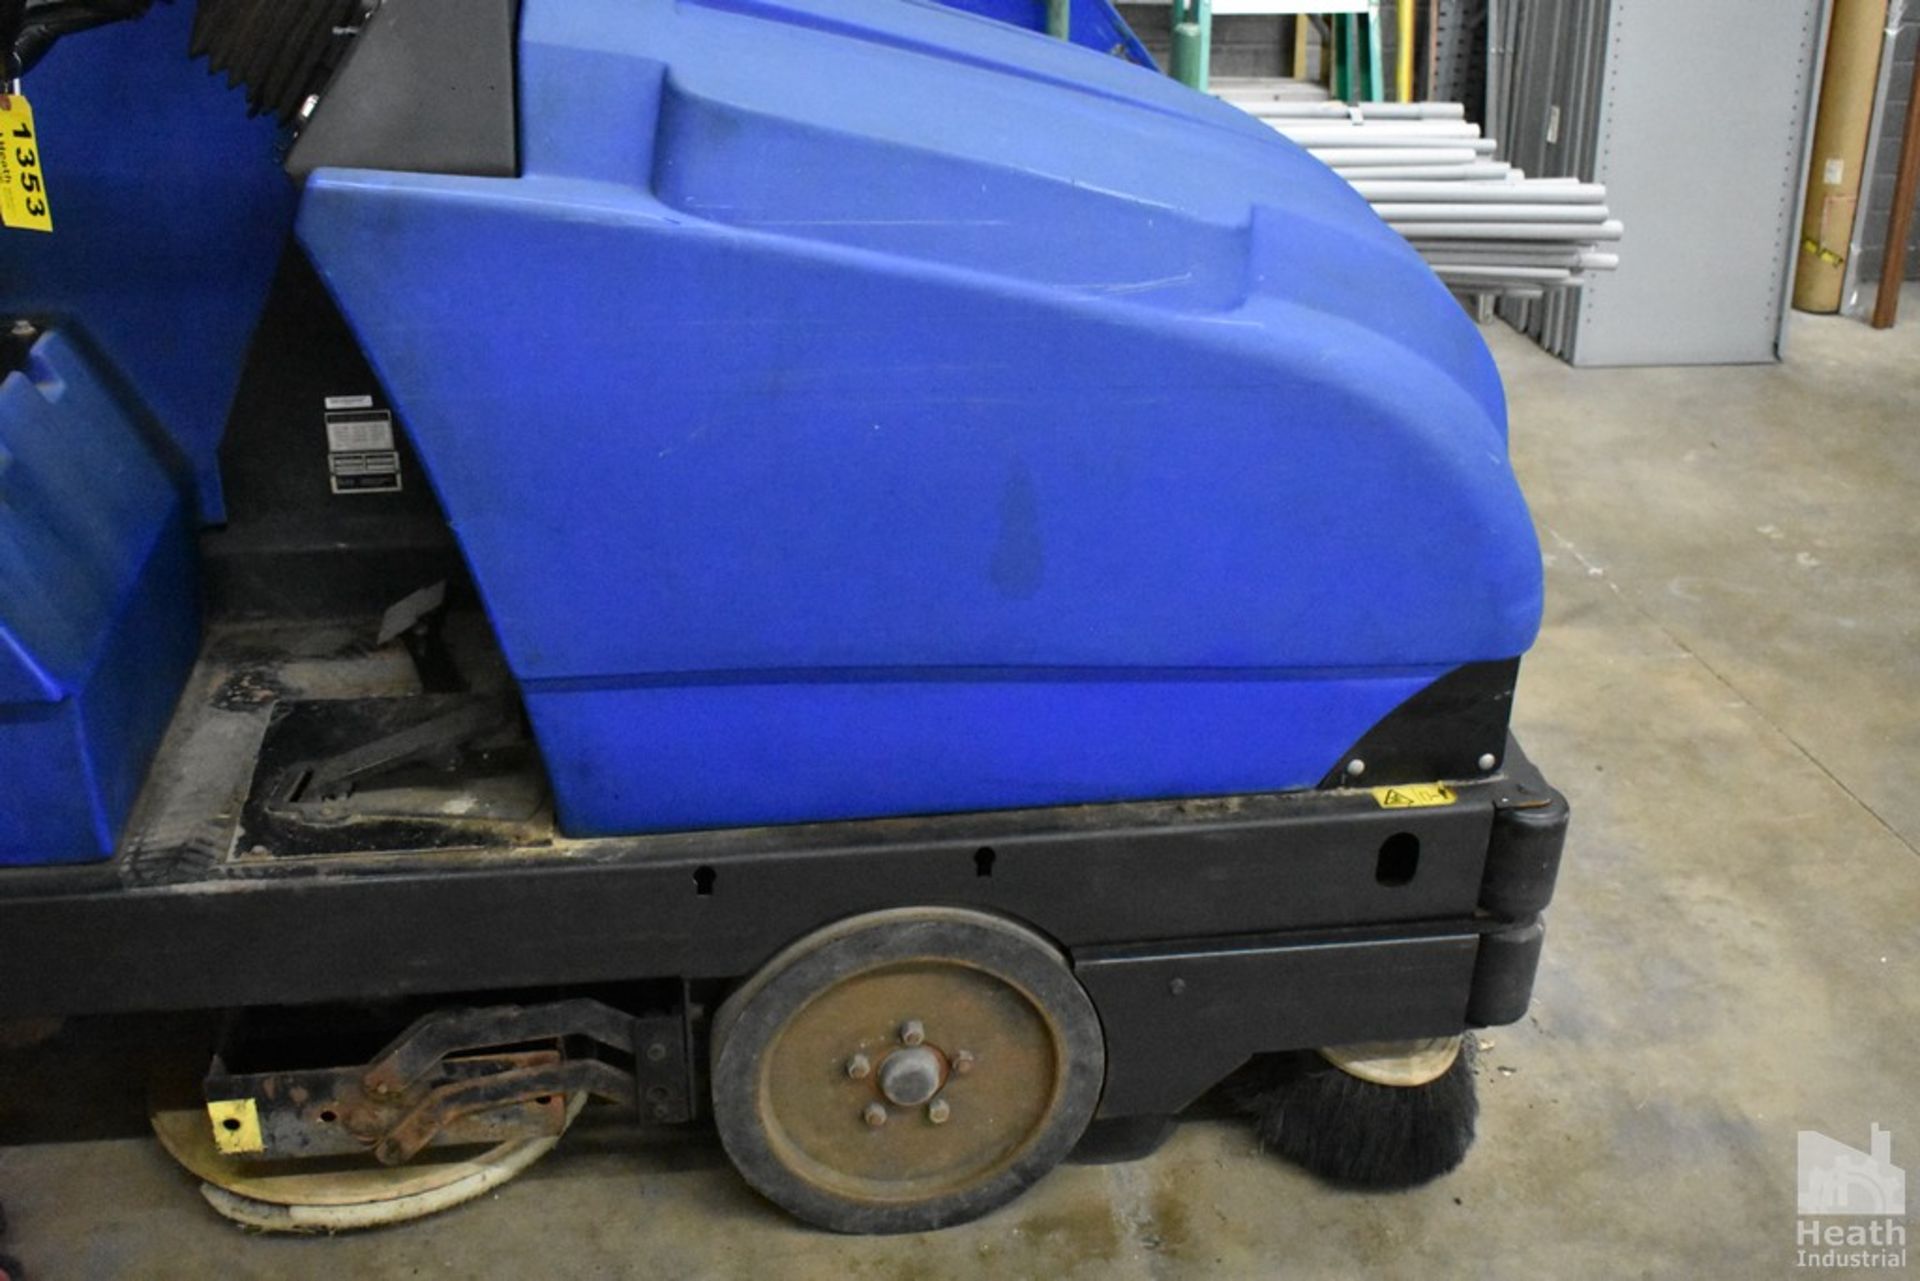 AMERICAN-LINCOLN MODEL 505-322 ELECTRIC FLOOR SWEEPER, 36 VOLT, S/N 692120, LENGTH 8'', WIDTH 4' - Image 4 of 10